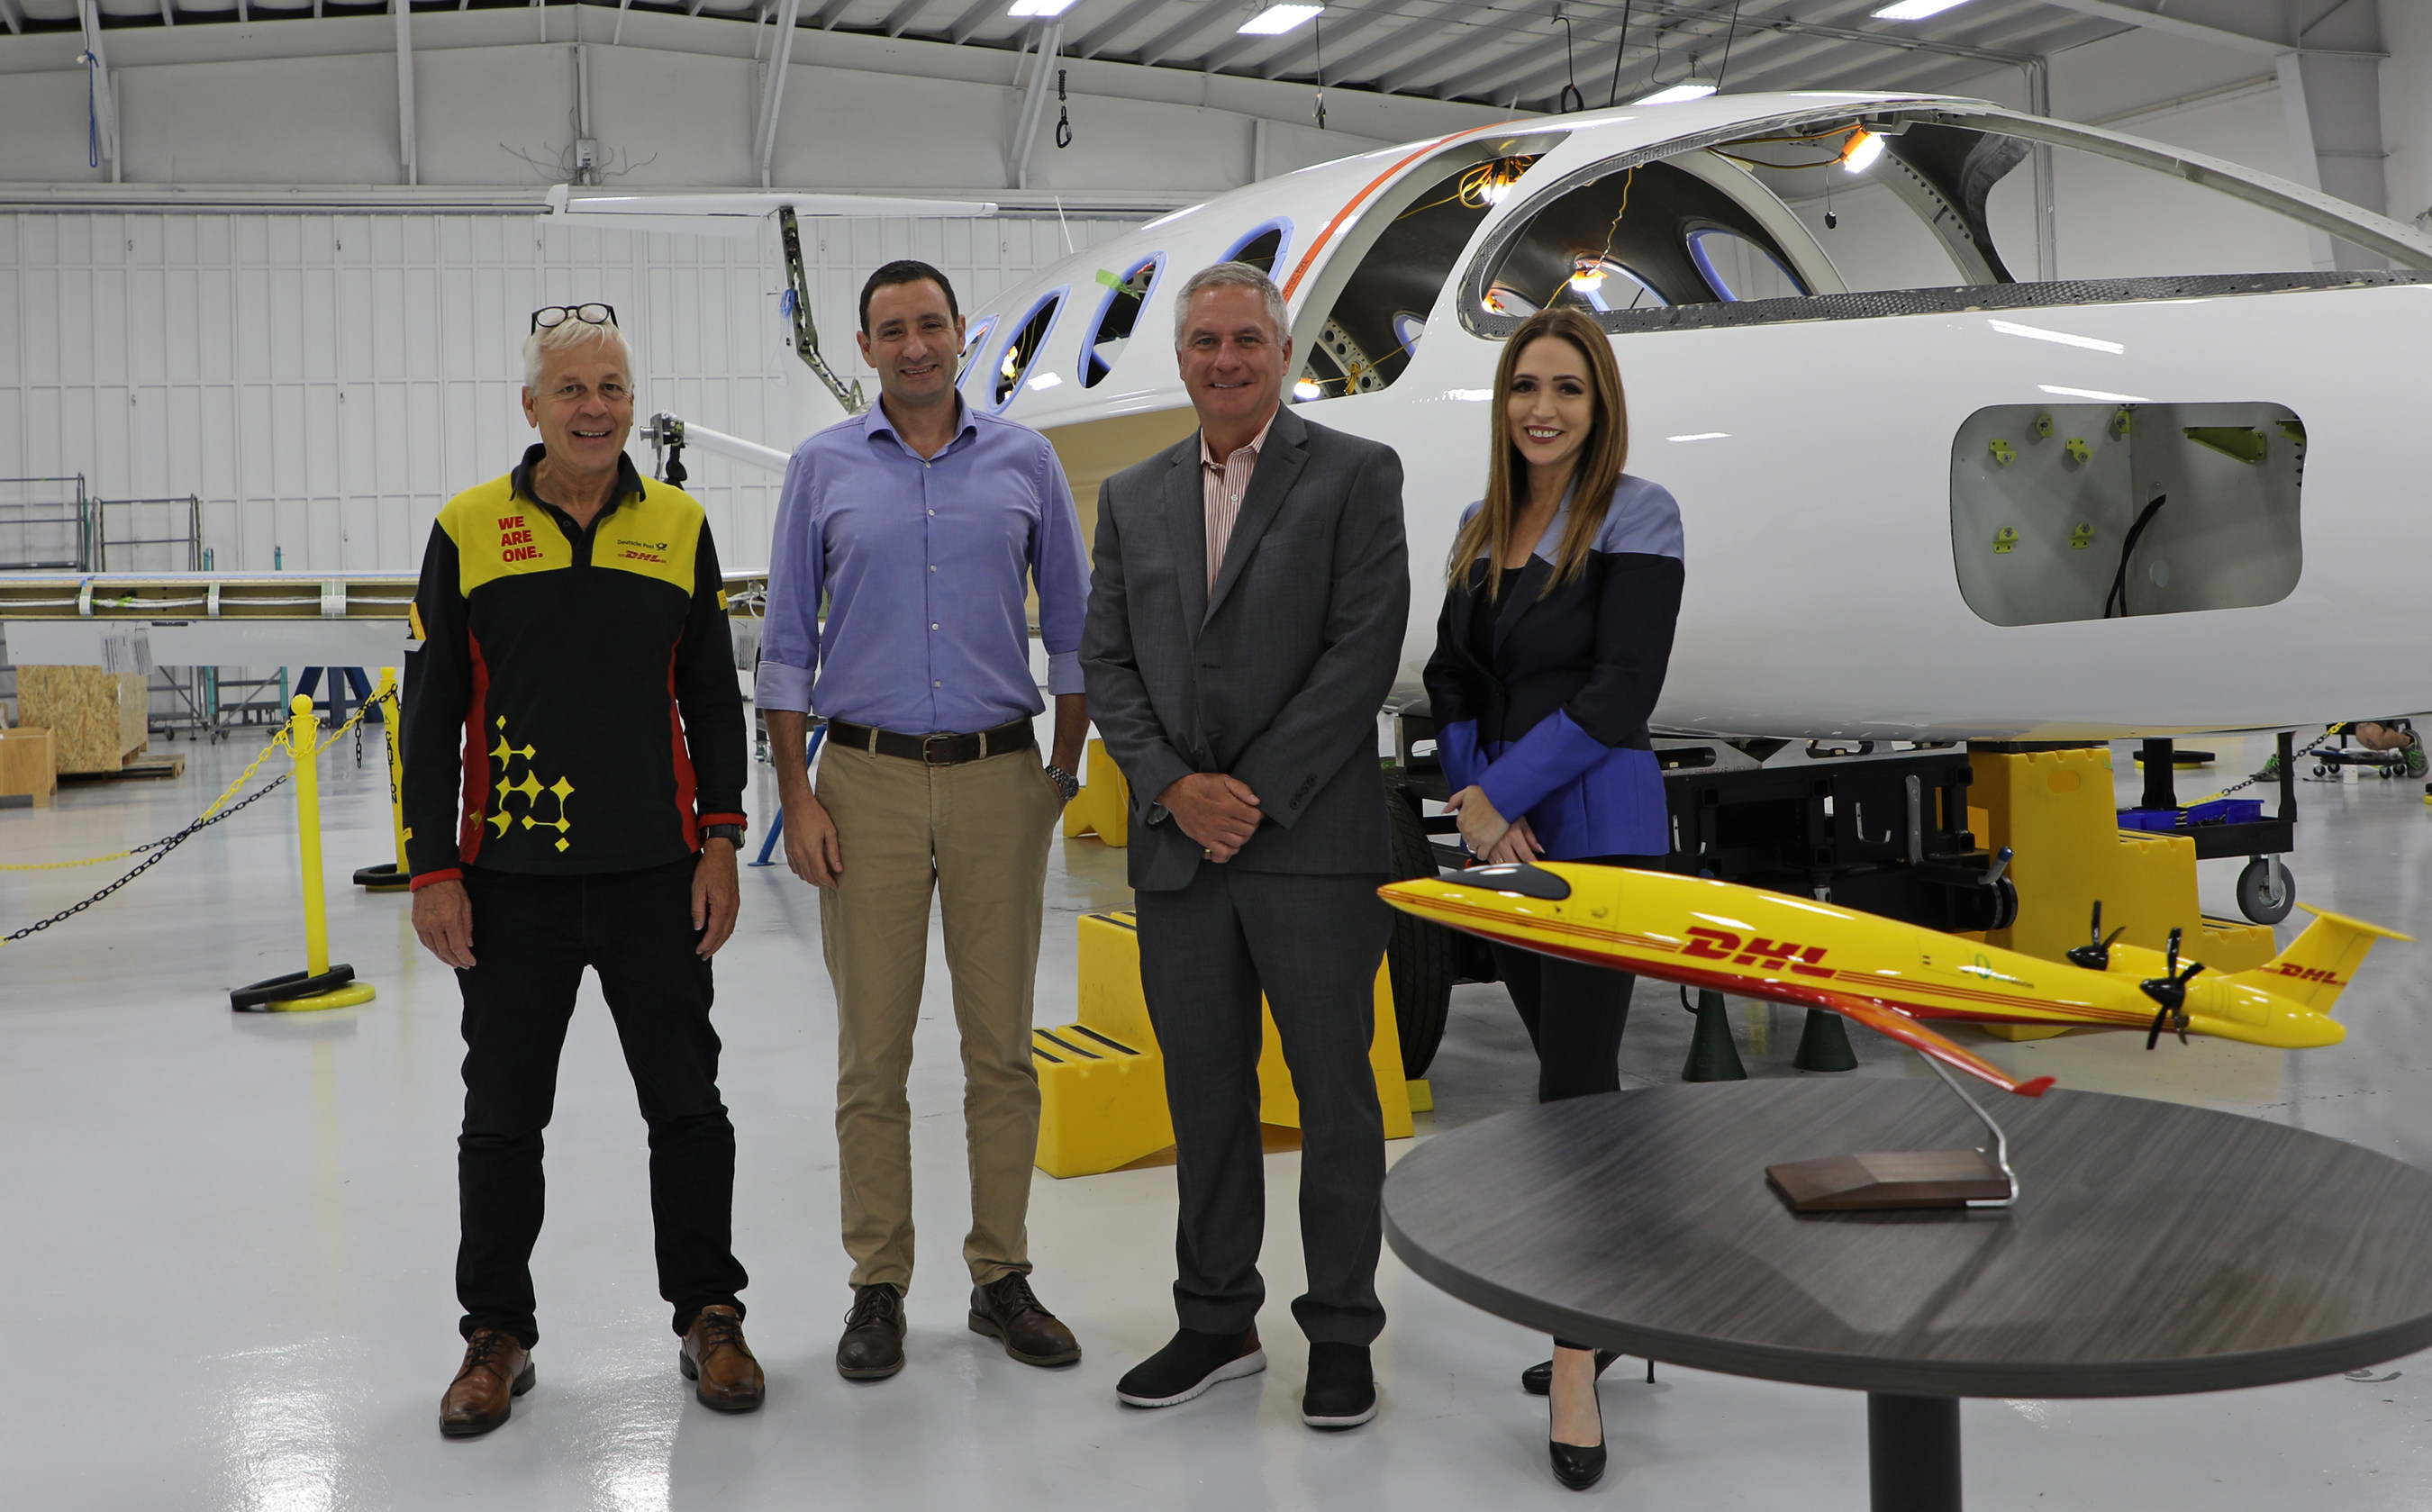 Left to right: Geoff Kehr, SVP Global Aviation Fleet Management, Global Aviation (DHL Express Global Head Office); Omer Bar-Yohay, CEO of Eviation Aircraft; Robert Hyslop, Senior Vice President, DHL Aviation; Jessica Pruss – Head of Sales, General Aviation and Business Aviation, Eviation Aircraft.